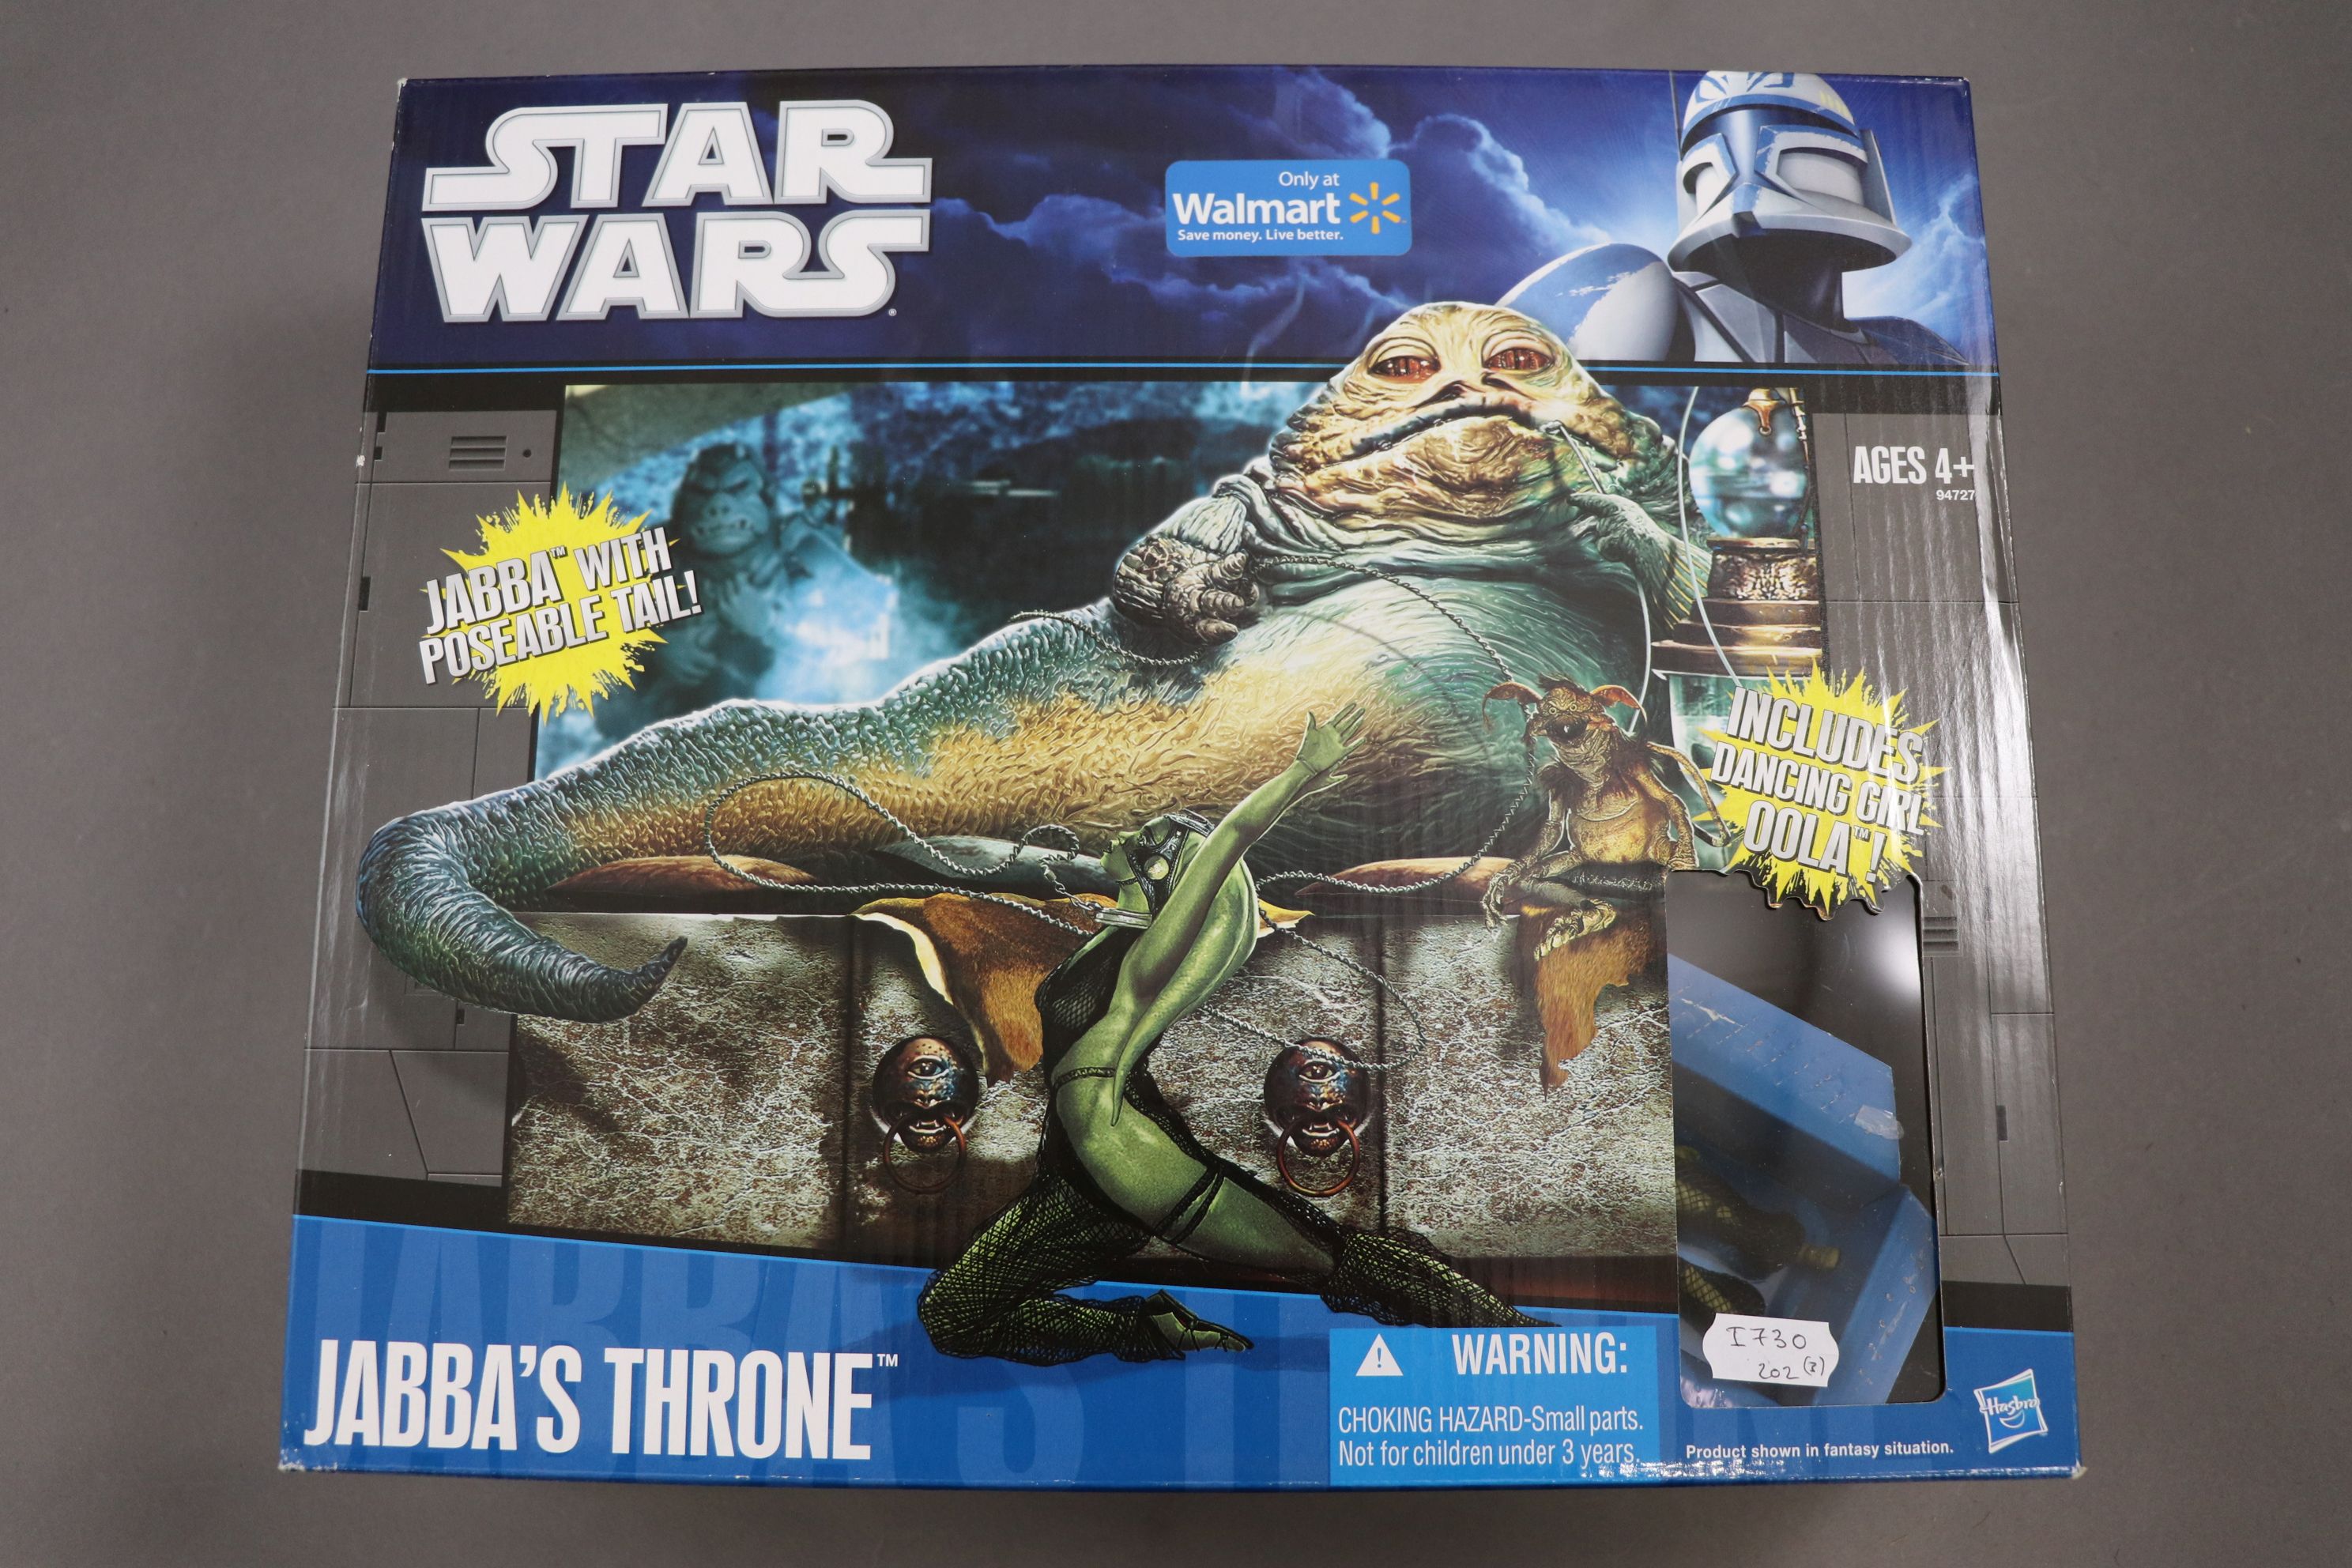 Star Wars - Three boxed Hasbro Star Wars vehicle/play sets to include Jabba's Throne (Walmart - Image 2 of 5